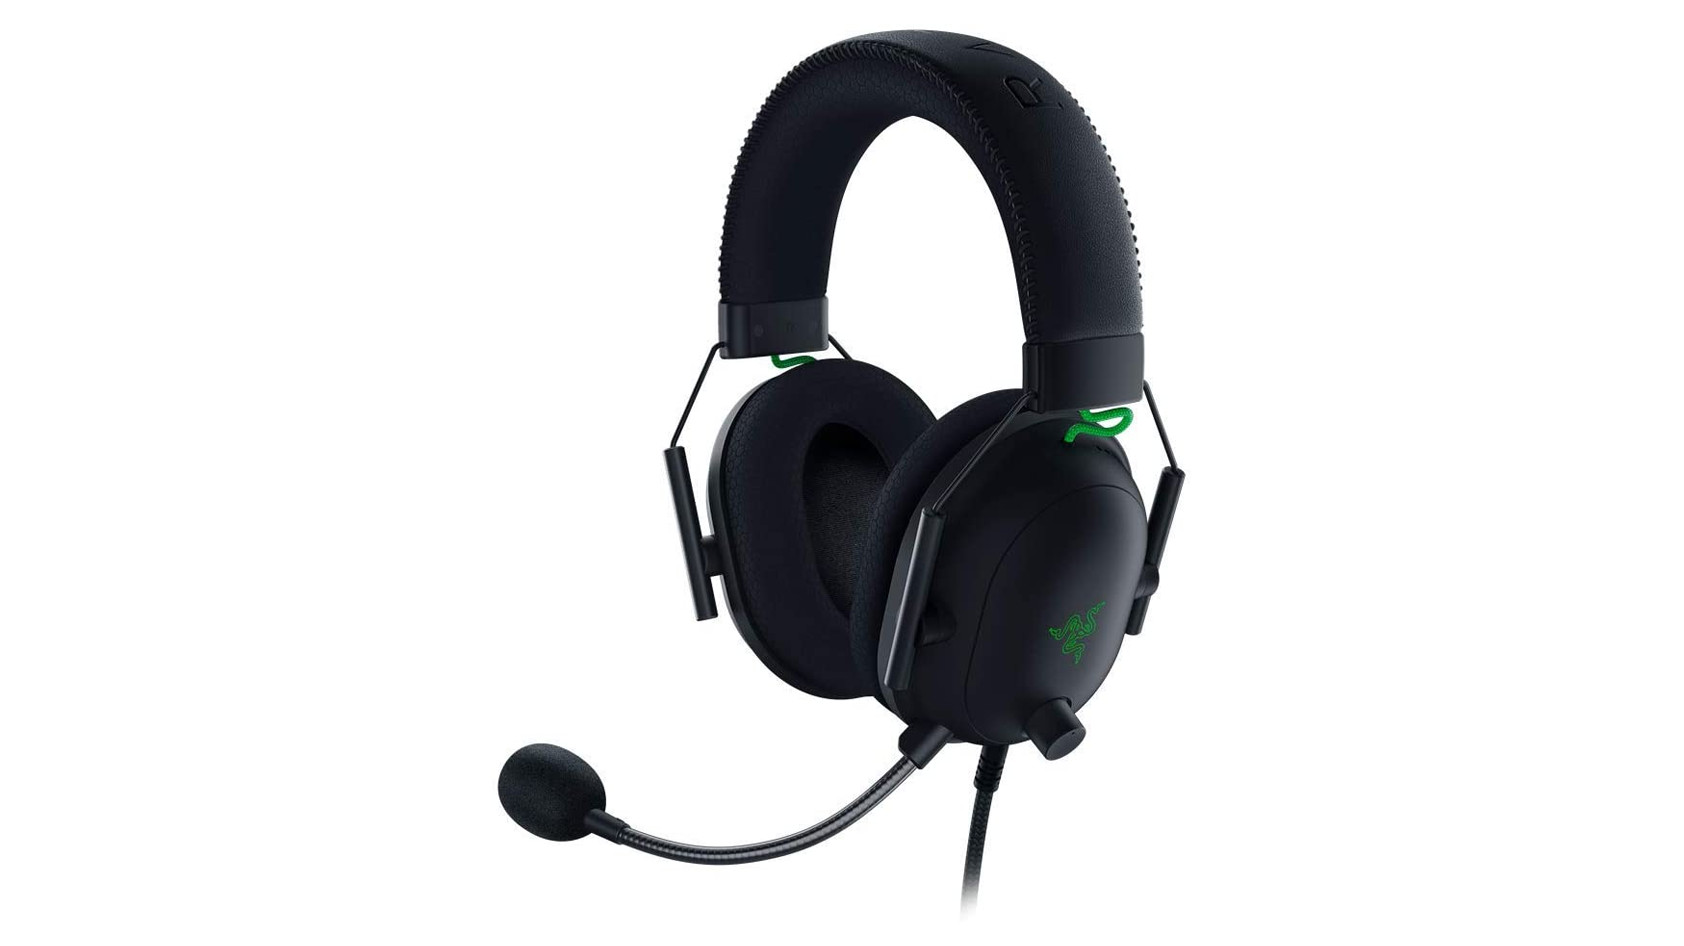 Razer Headset Guide: Finding The Best For You